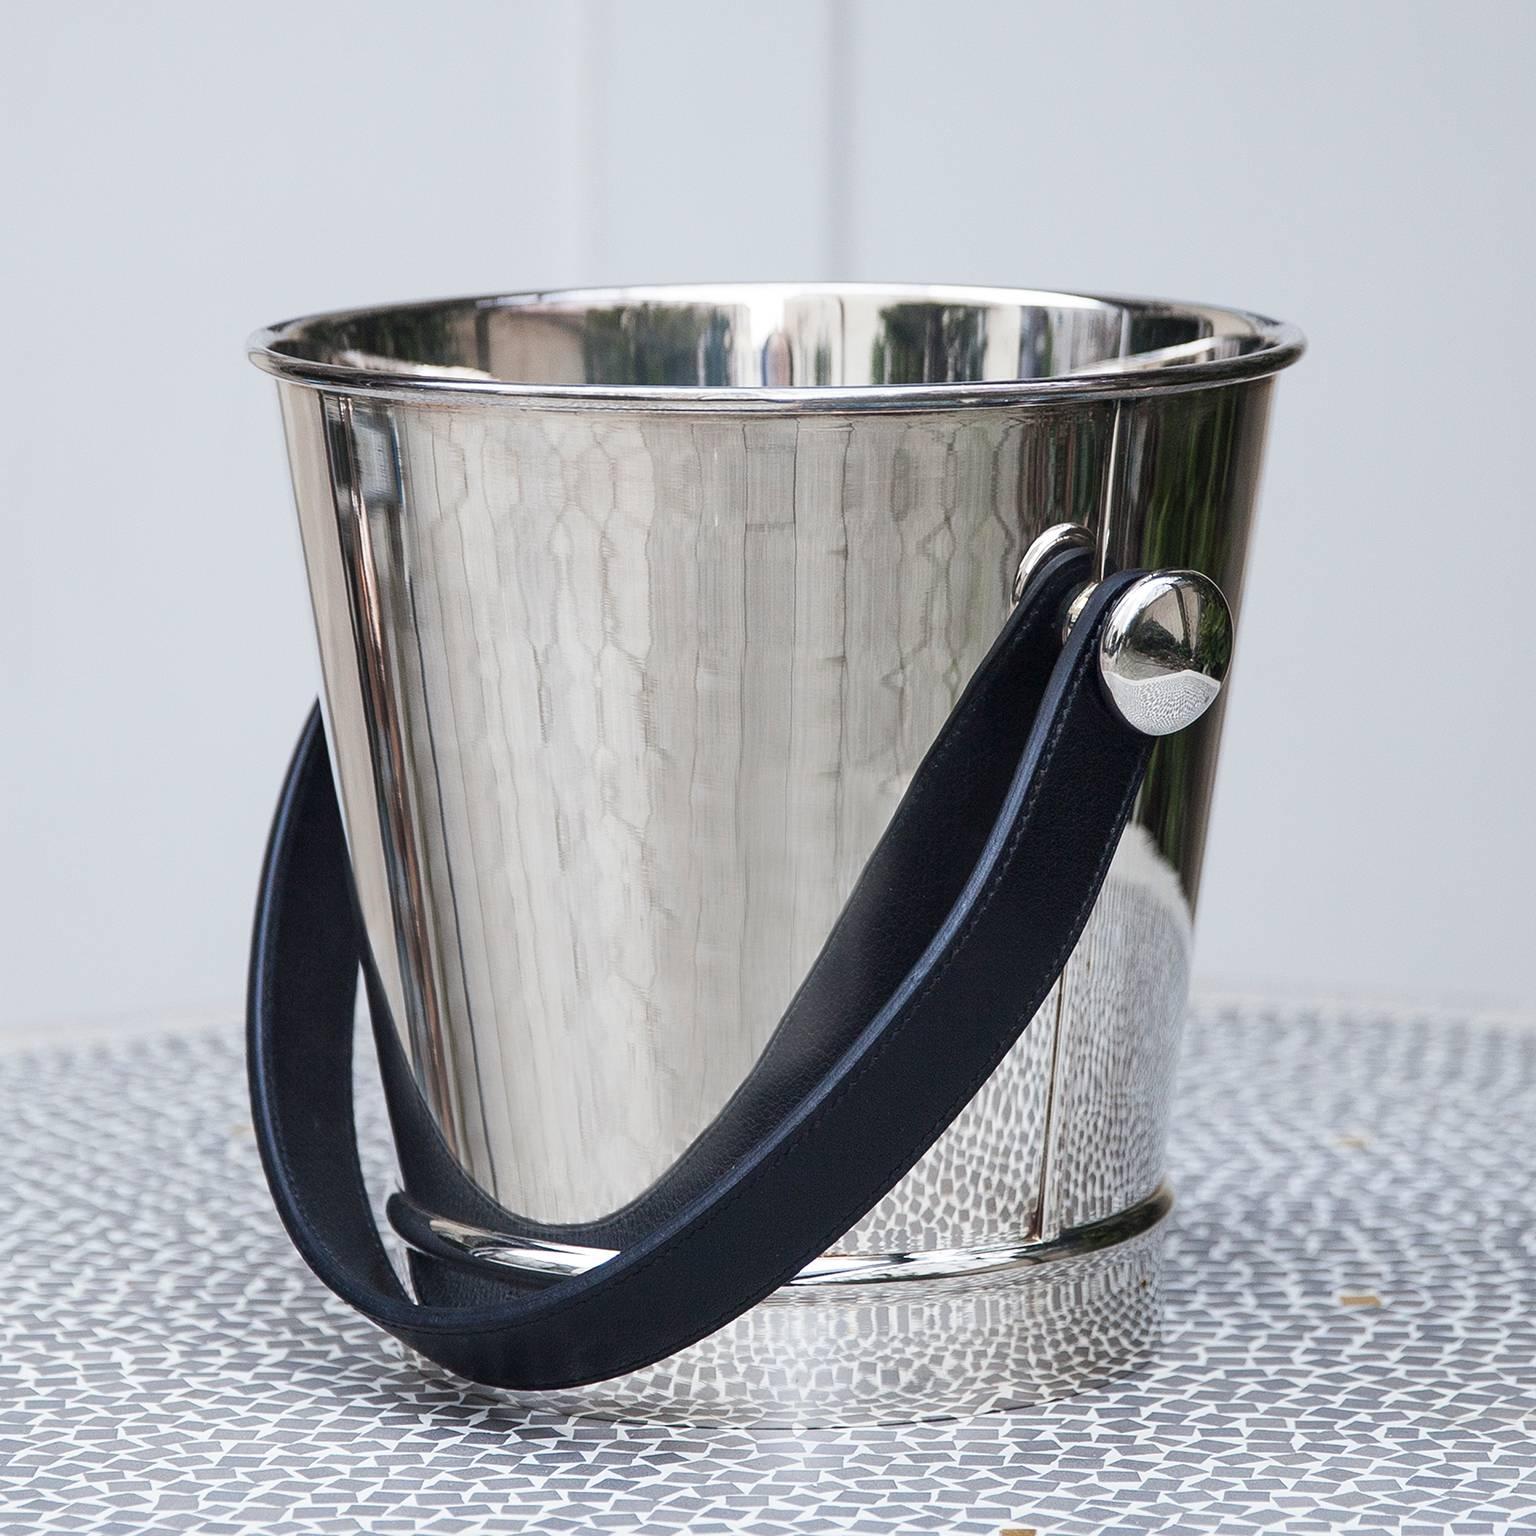 Hermes silver plated champagne wine cooler or ice bucket. This Amazing object speaks for its self. It was a custom order pieces with the hand-stitched leather handle.
Its the best of Hermes!